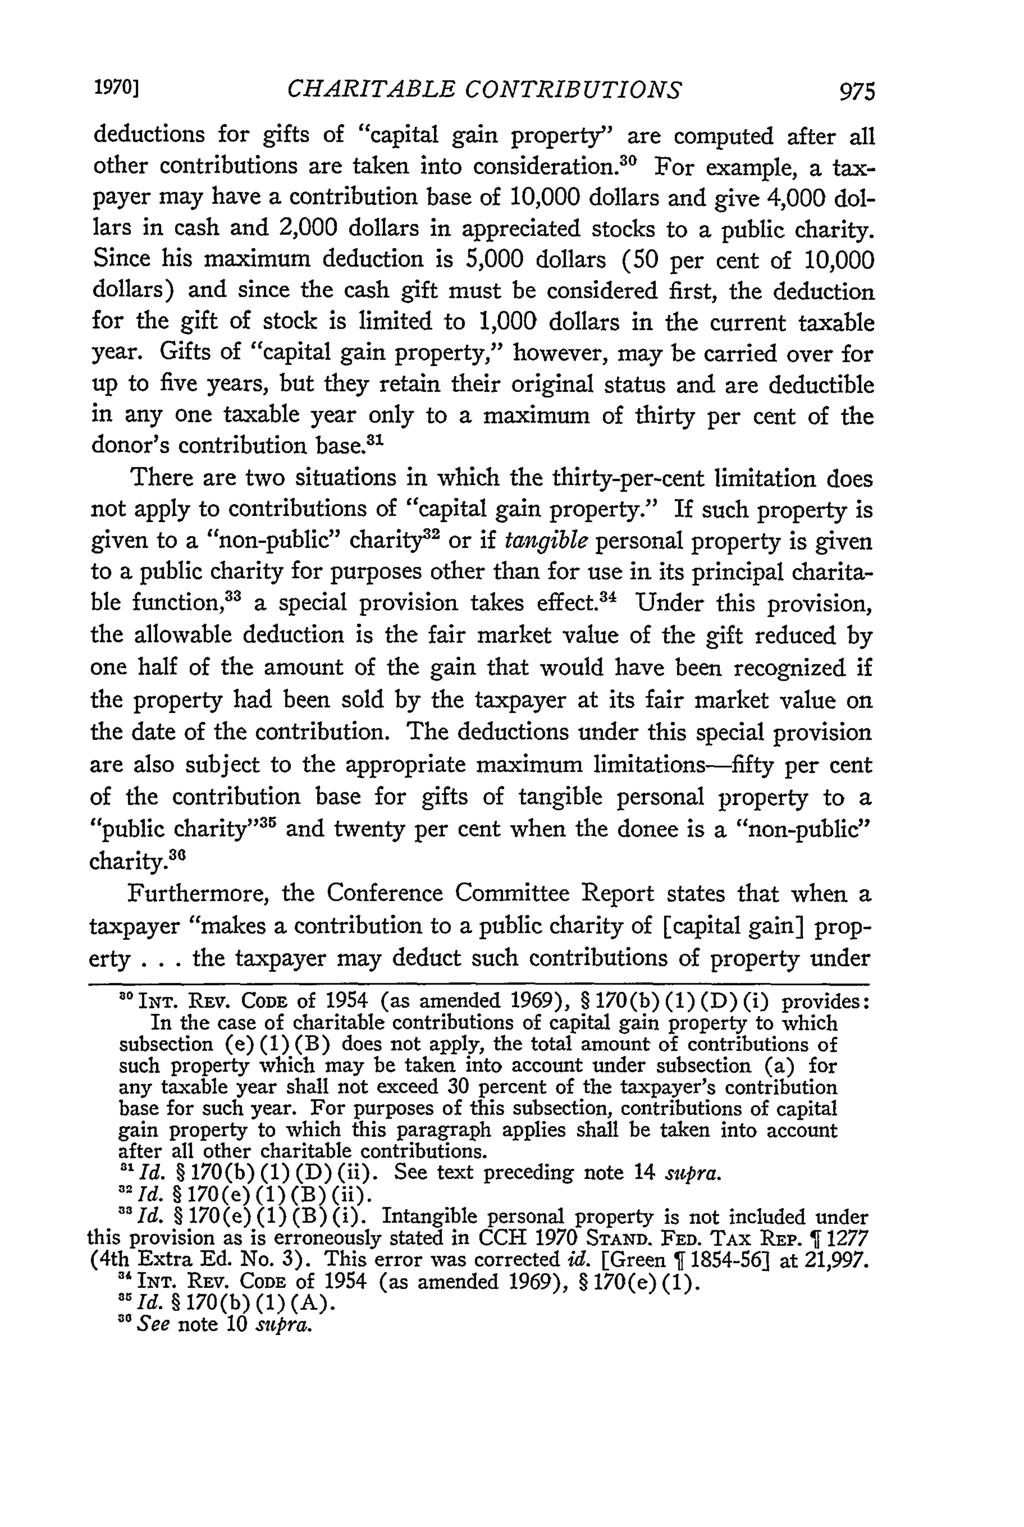 1970] CHARITABLE CONTRIBUTIONS deductions for gifts of "capital gain property" are computed after all other contributions are taken into consideration.